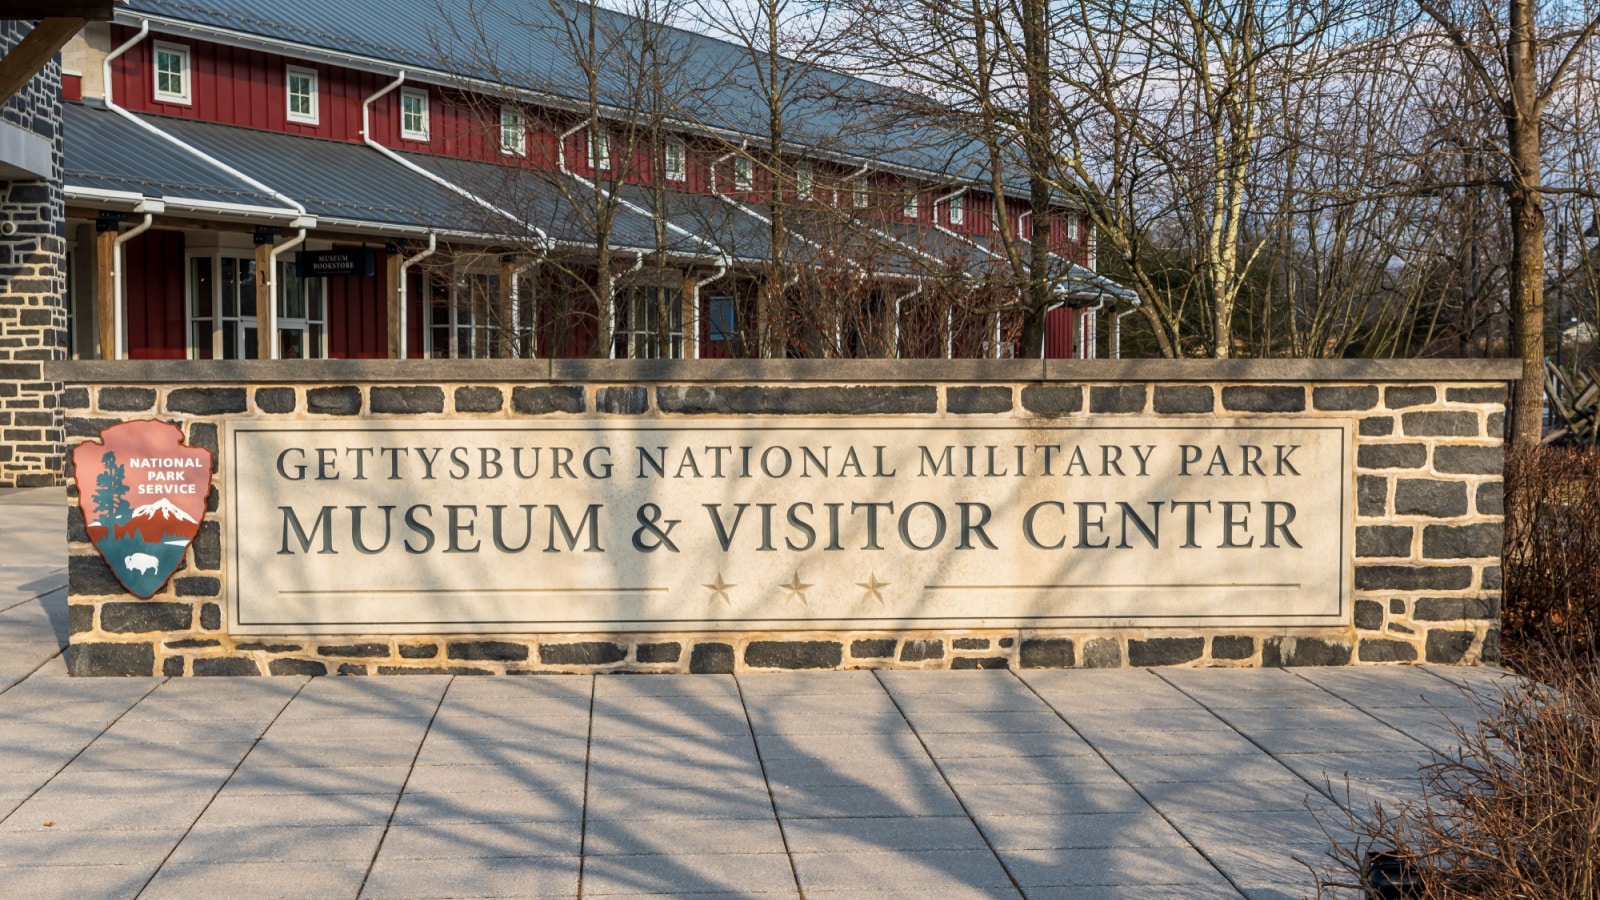 <p>In Gettysburg, this national park is a must-visit for its commemoration of the Civil War’s pivotal battle. It features tours, monuments, and a visitor center.</p>